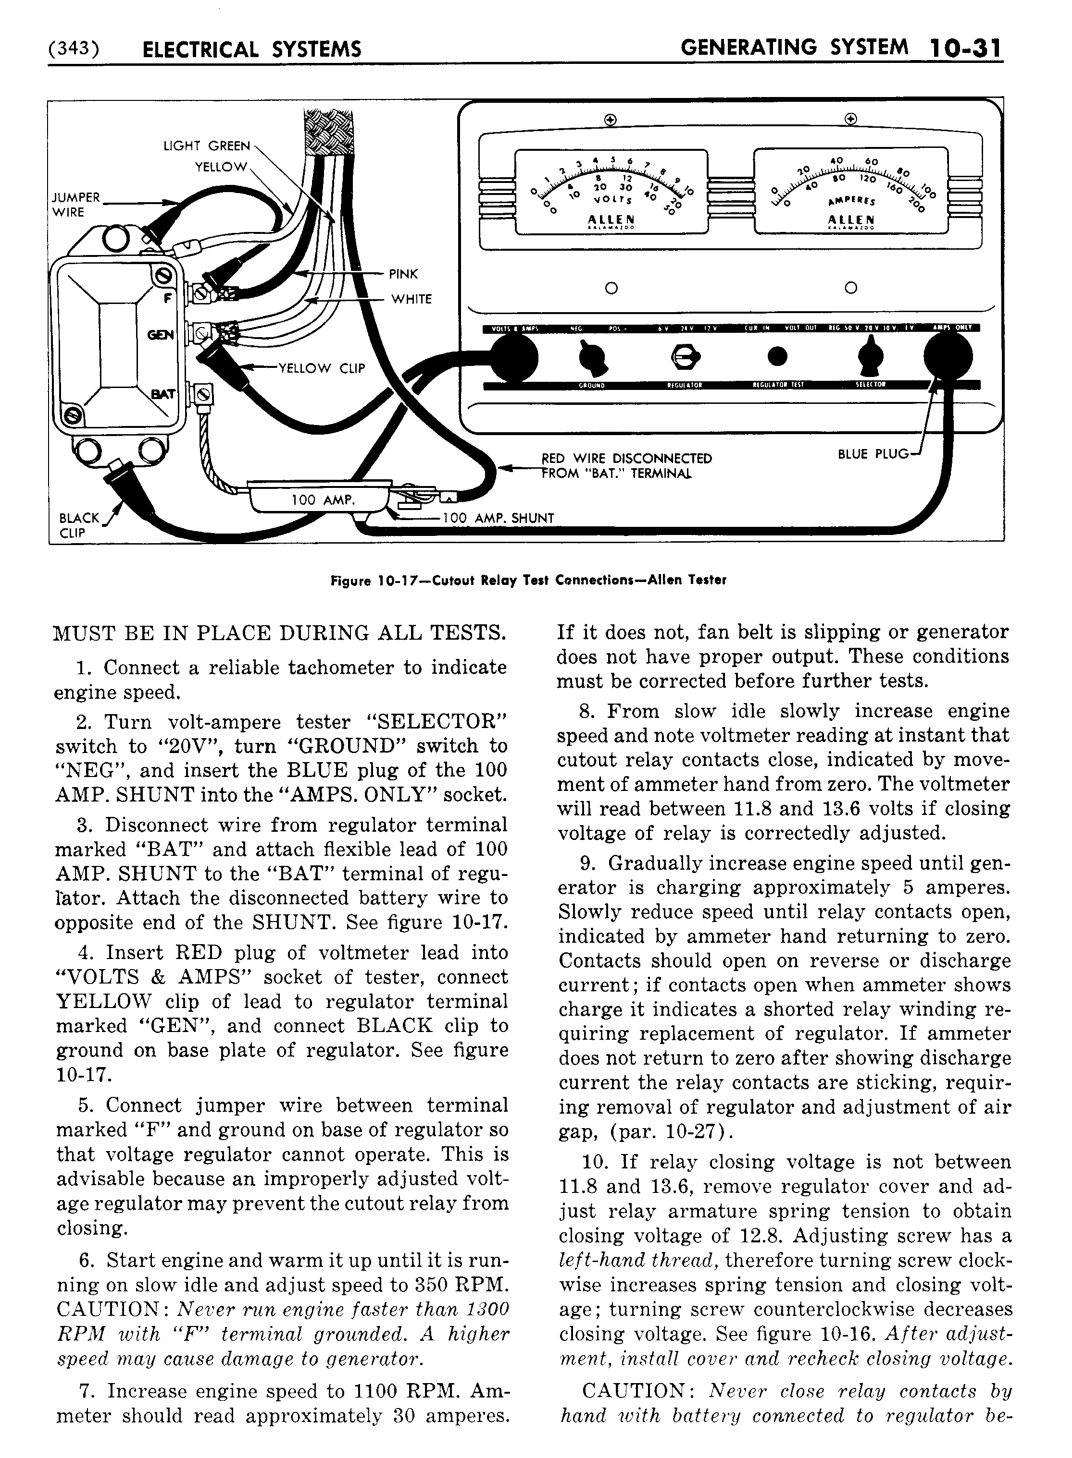 n_11 1954 Buick Shop Manual - Electrical Systems-031-031.jpg